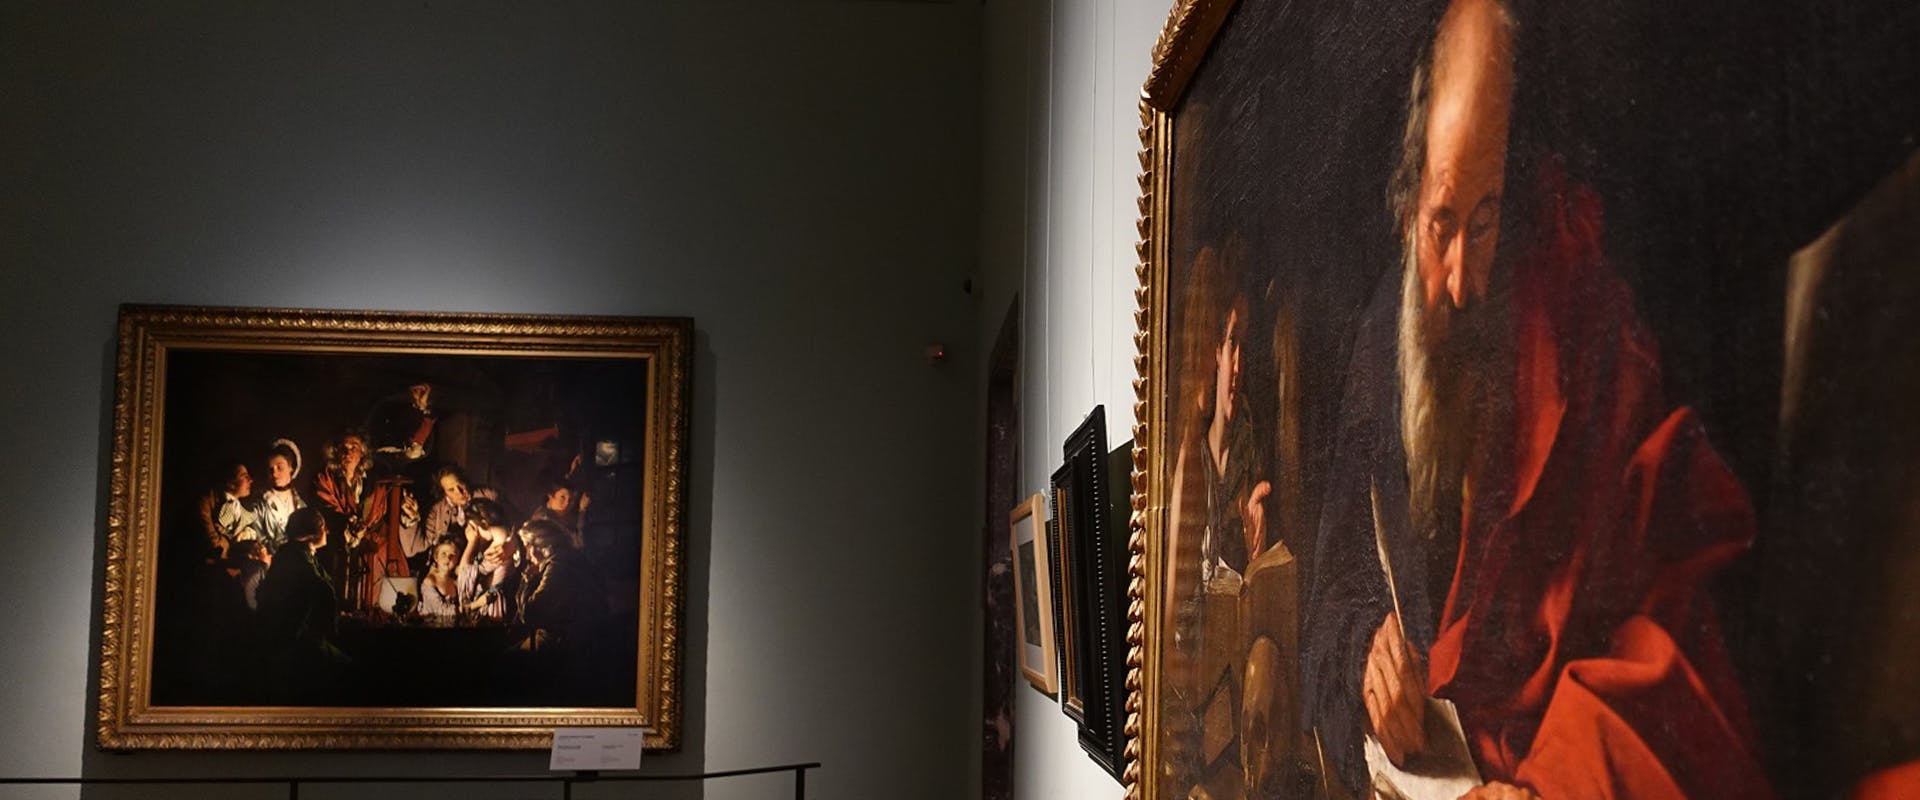 The renowned "Experiment" by Joseph Wright of Derby in Italy for the first time